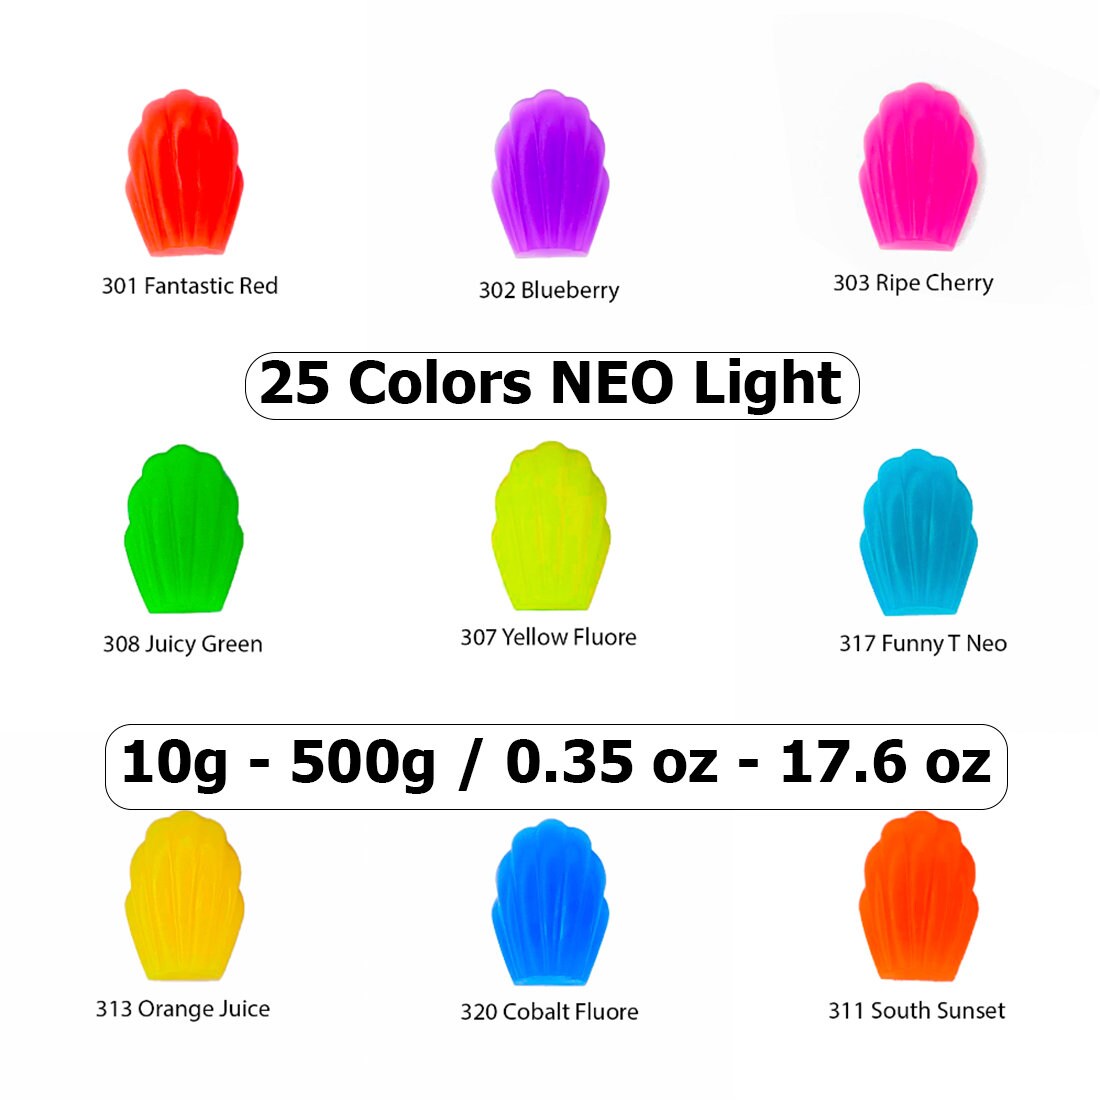 NEONZ Neon Effect Food Colouring Pastes 